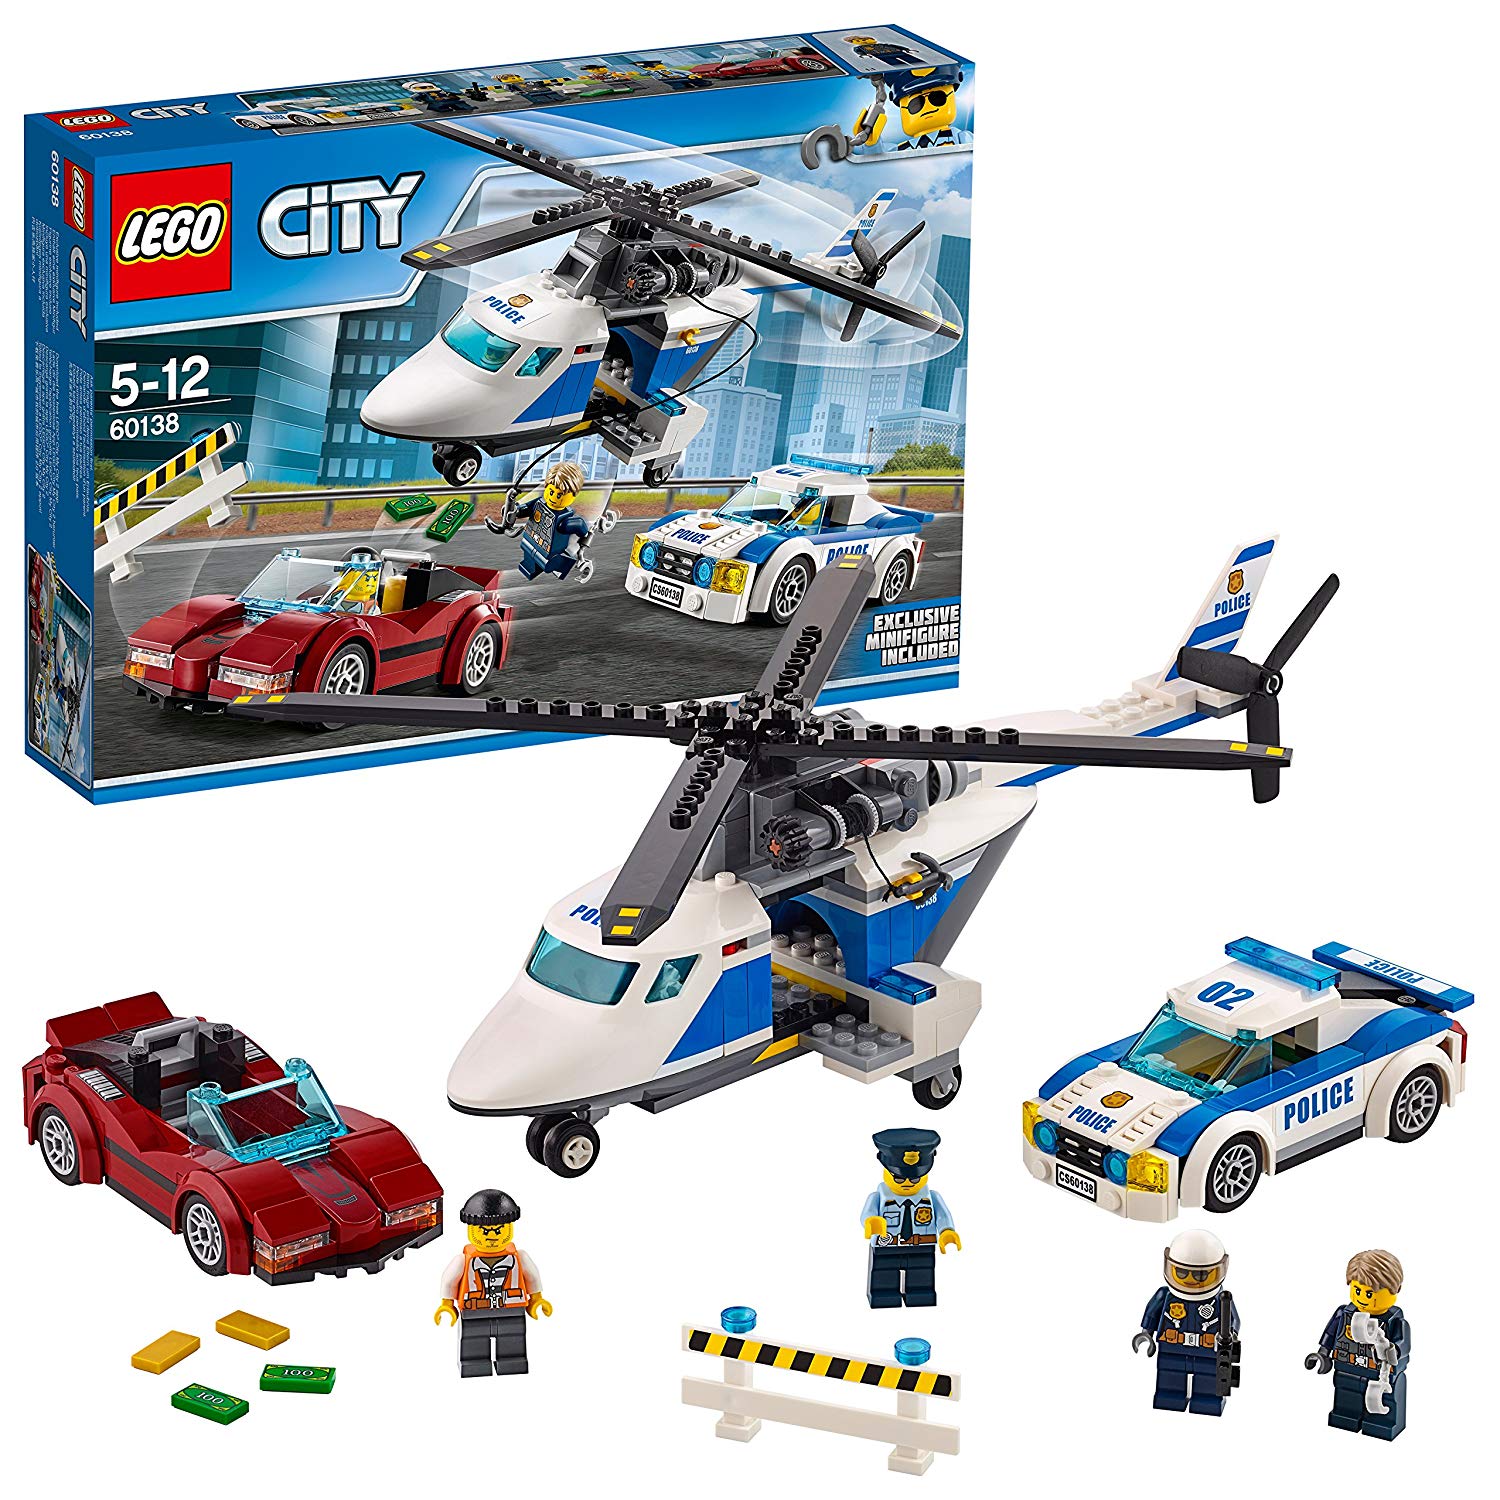 Lego City Rapid Tracking Hunting Building Block Toy